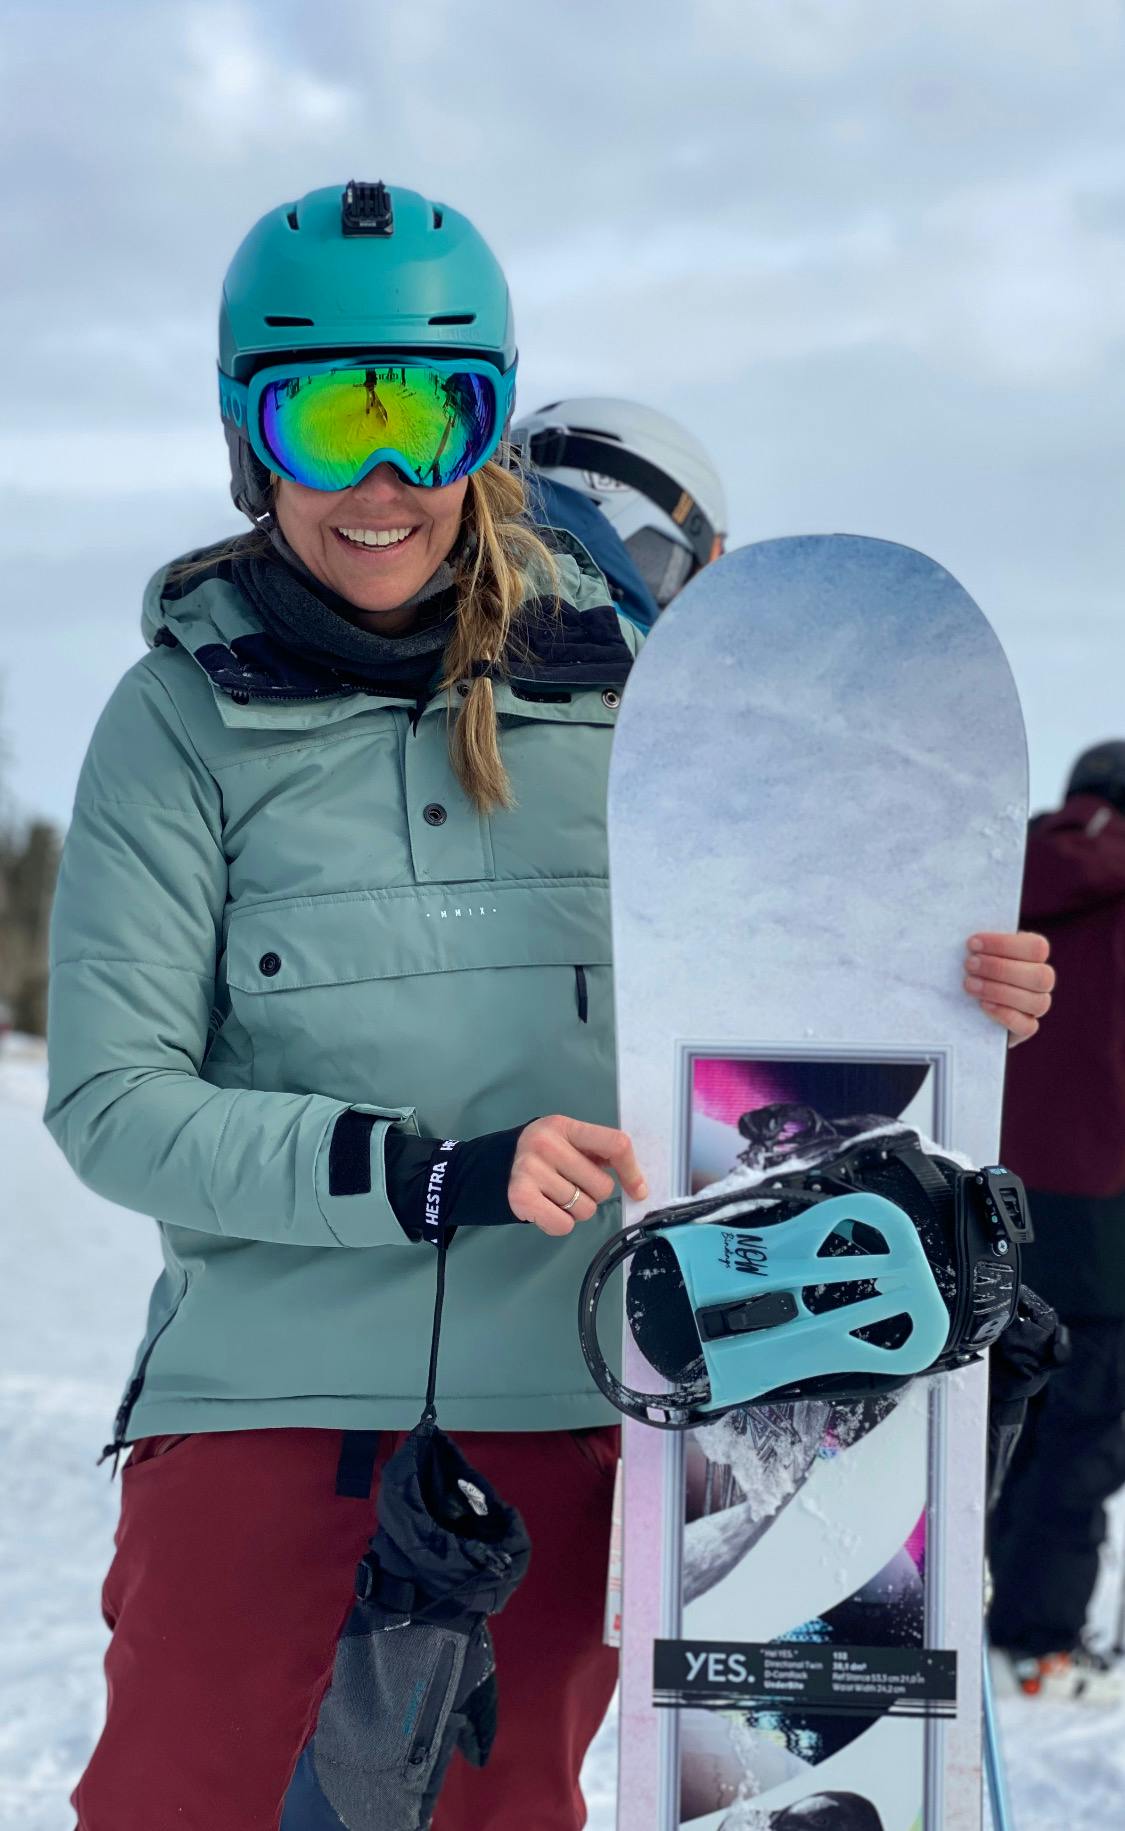 A woman standing next to a snowboard.